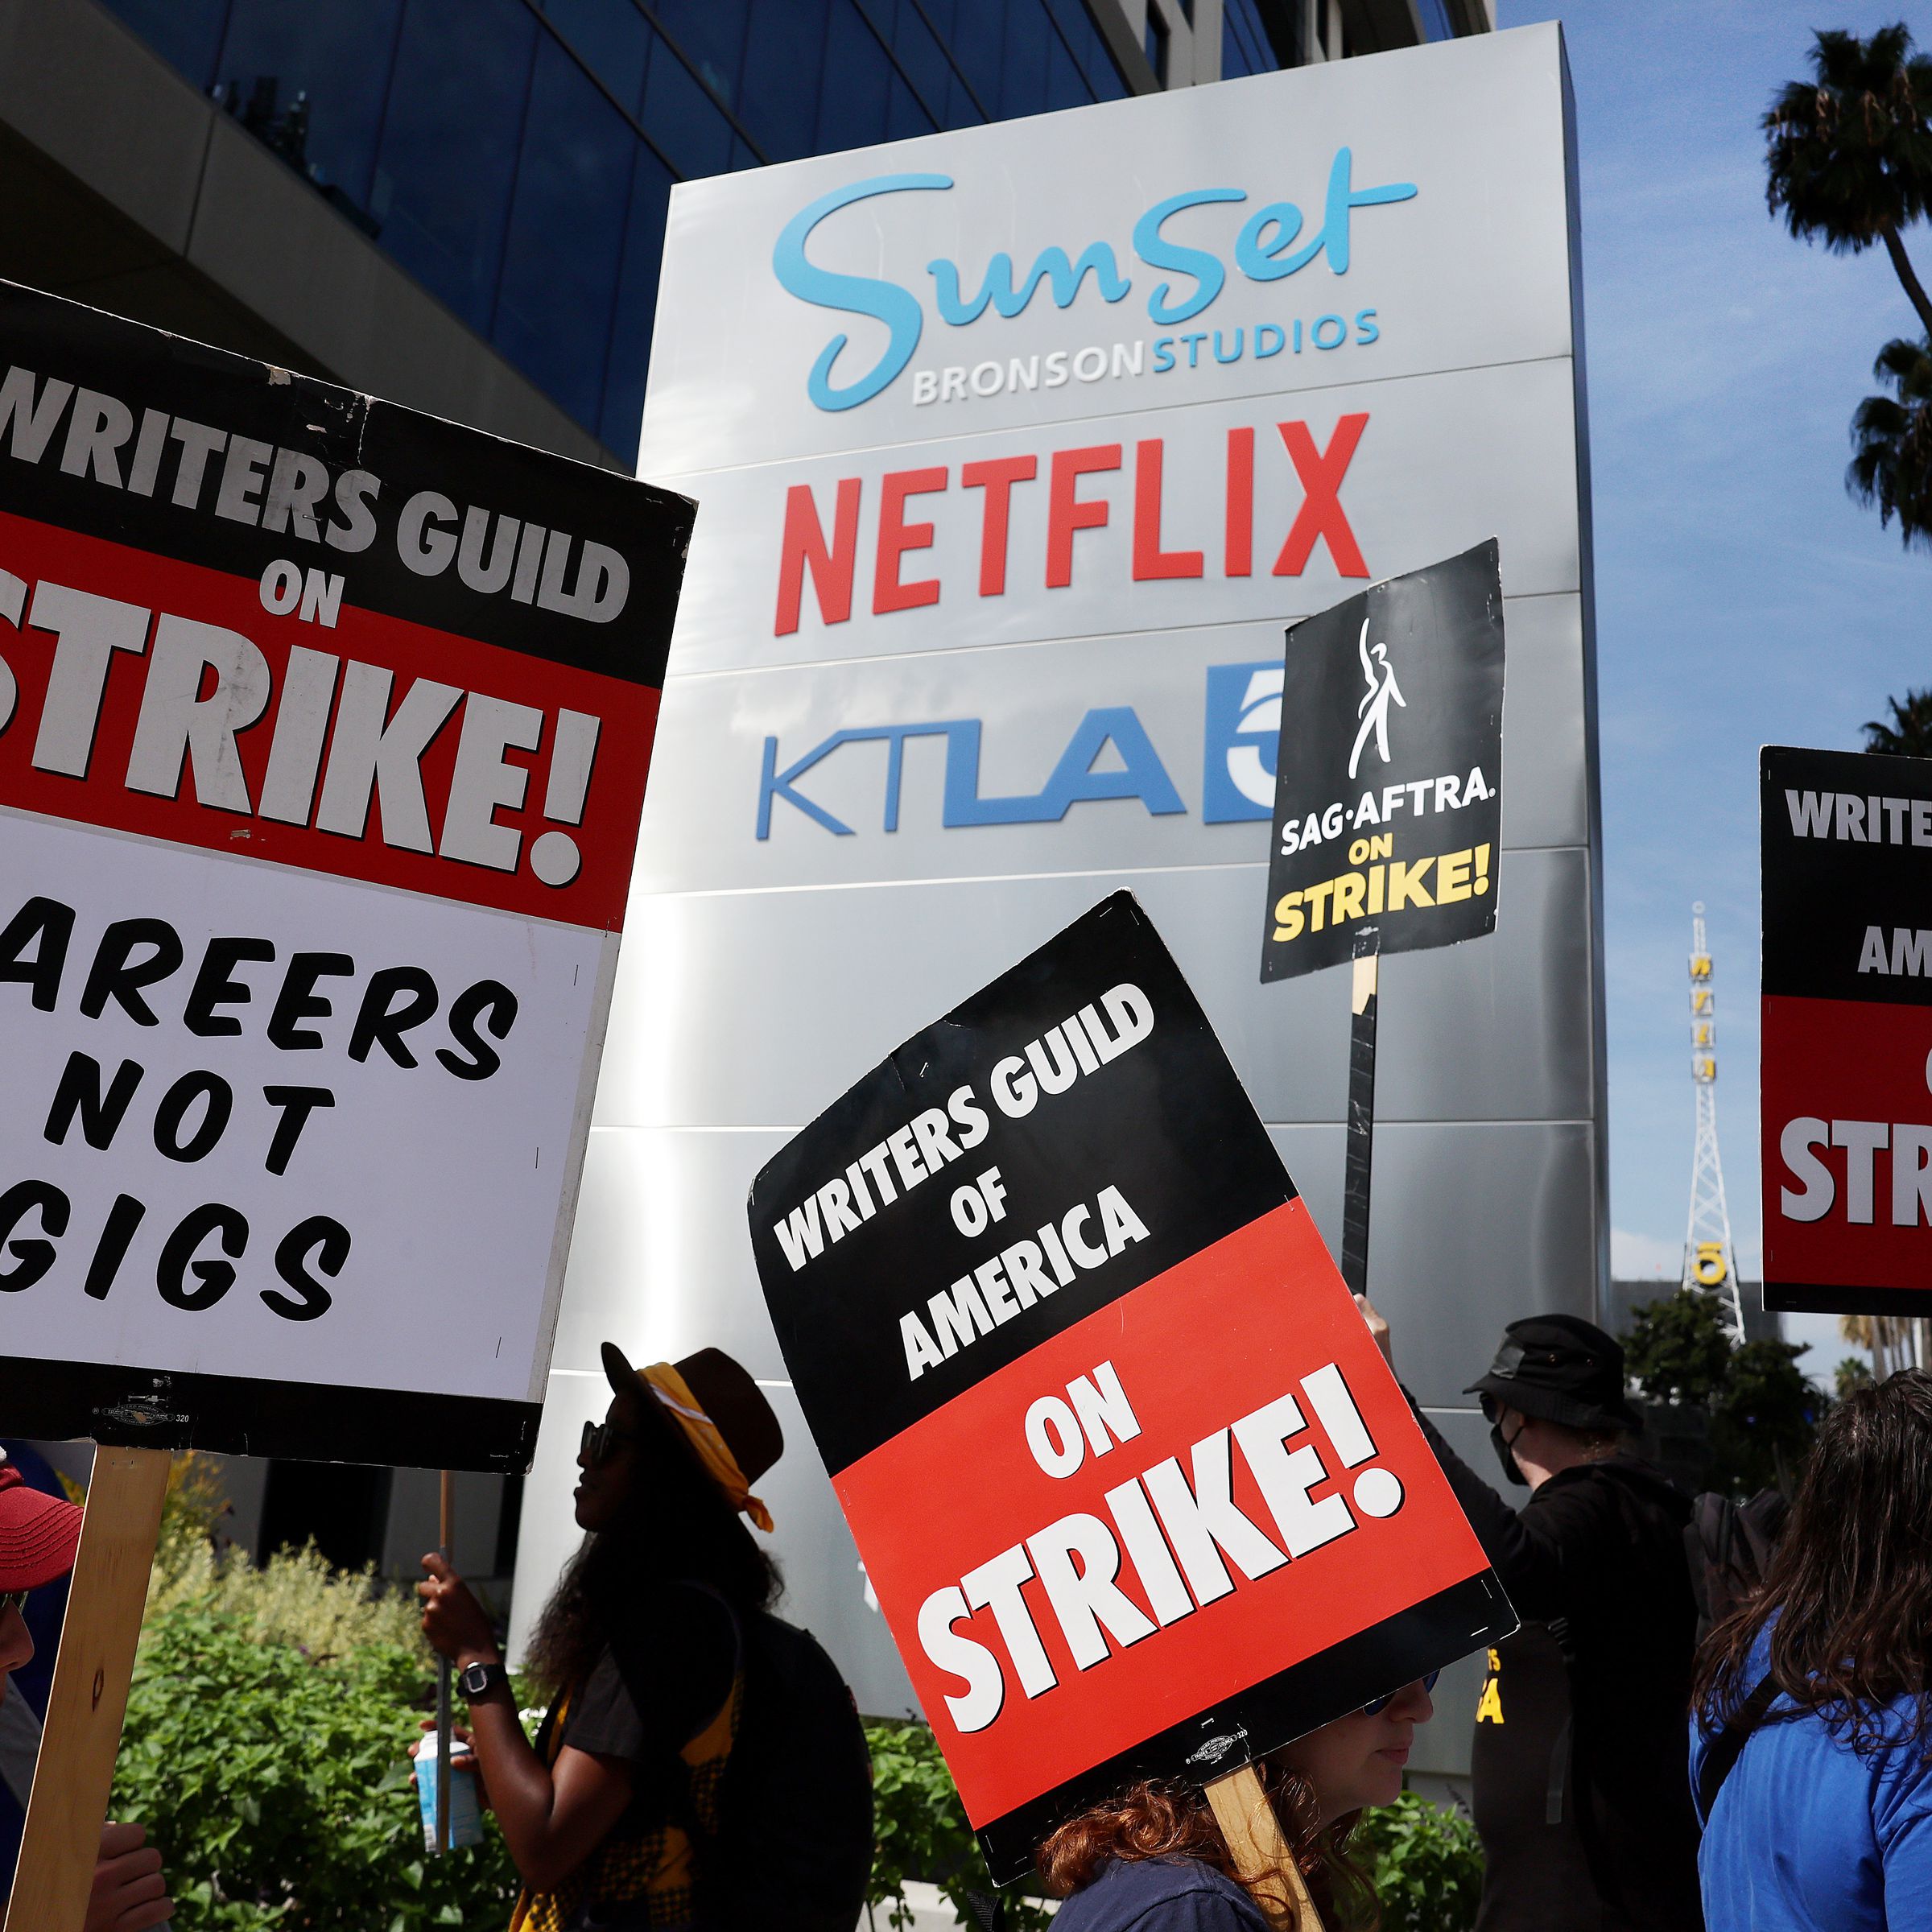 A photo showing Hollywood writers on strike